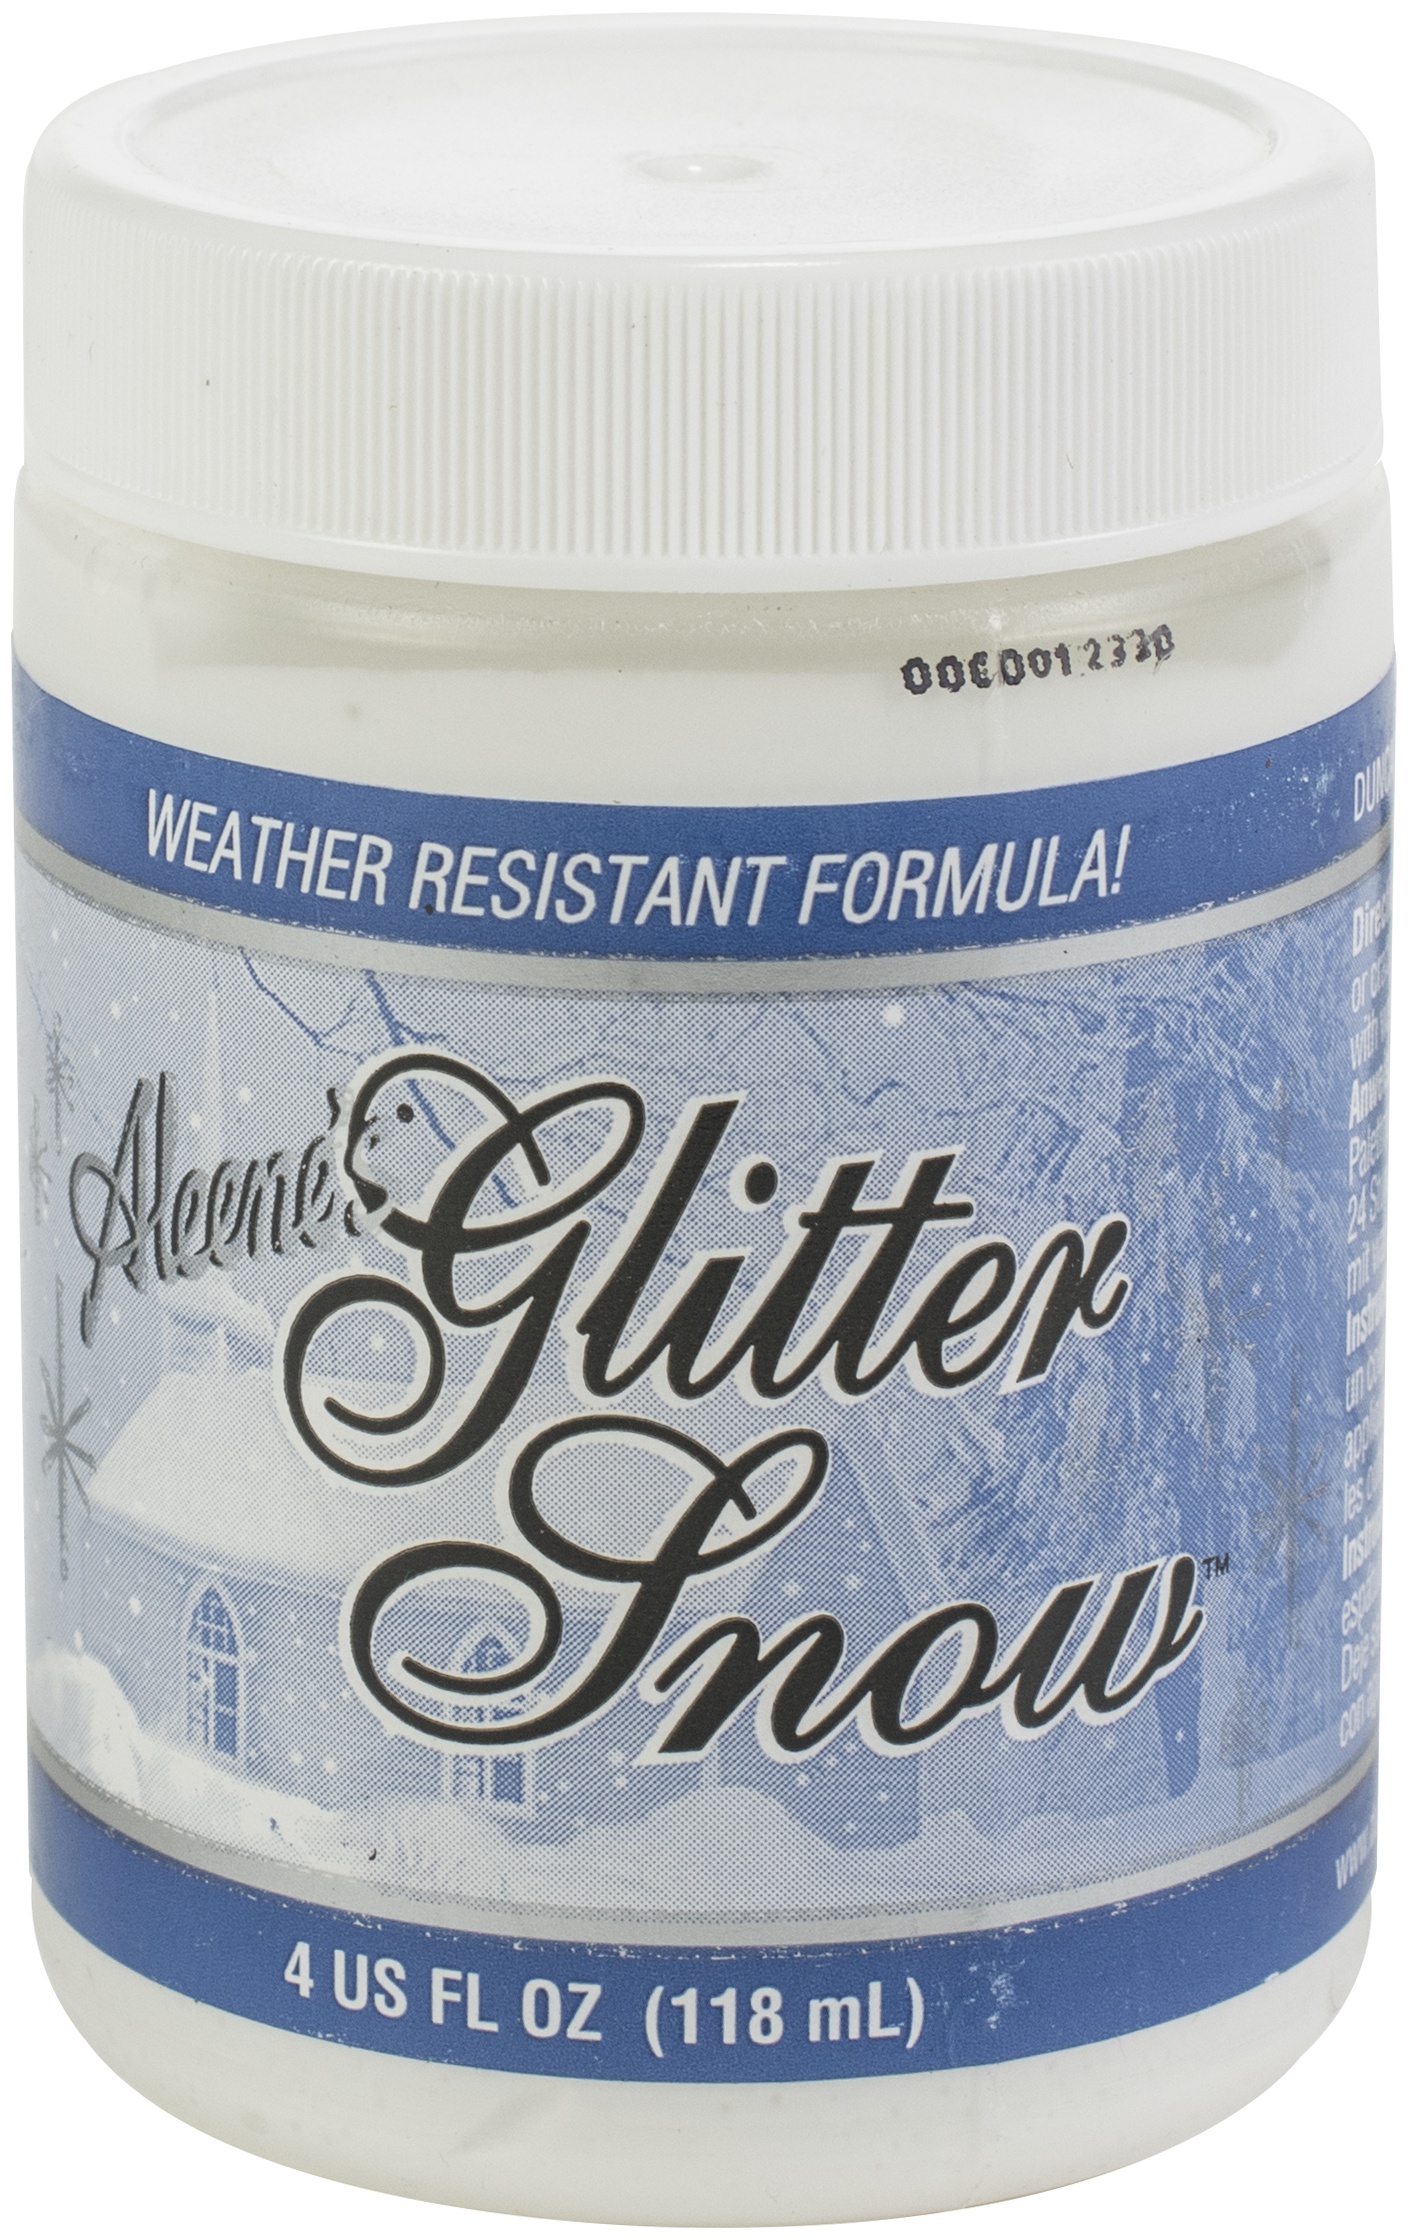 Aleene's Adhesives Bulk Buy Duncan Crafts Snow Glitter Paint 4 Ounces SP408 3-Pack - image 1 of 5